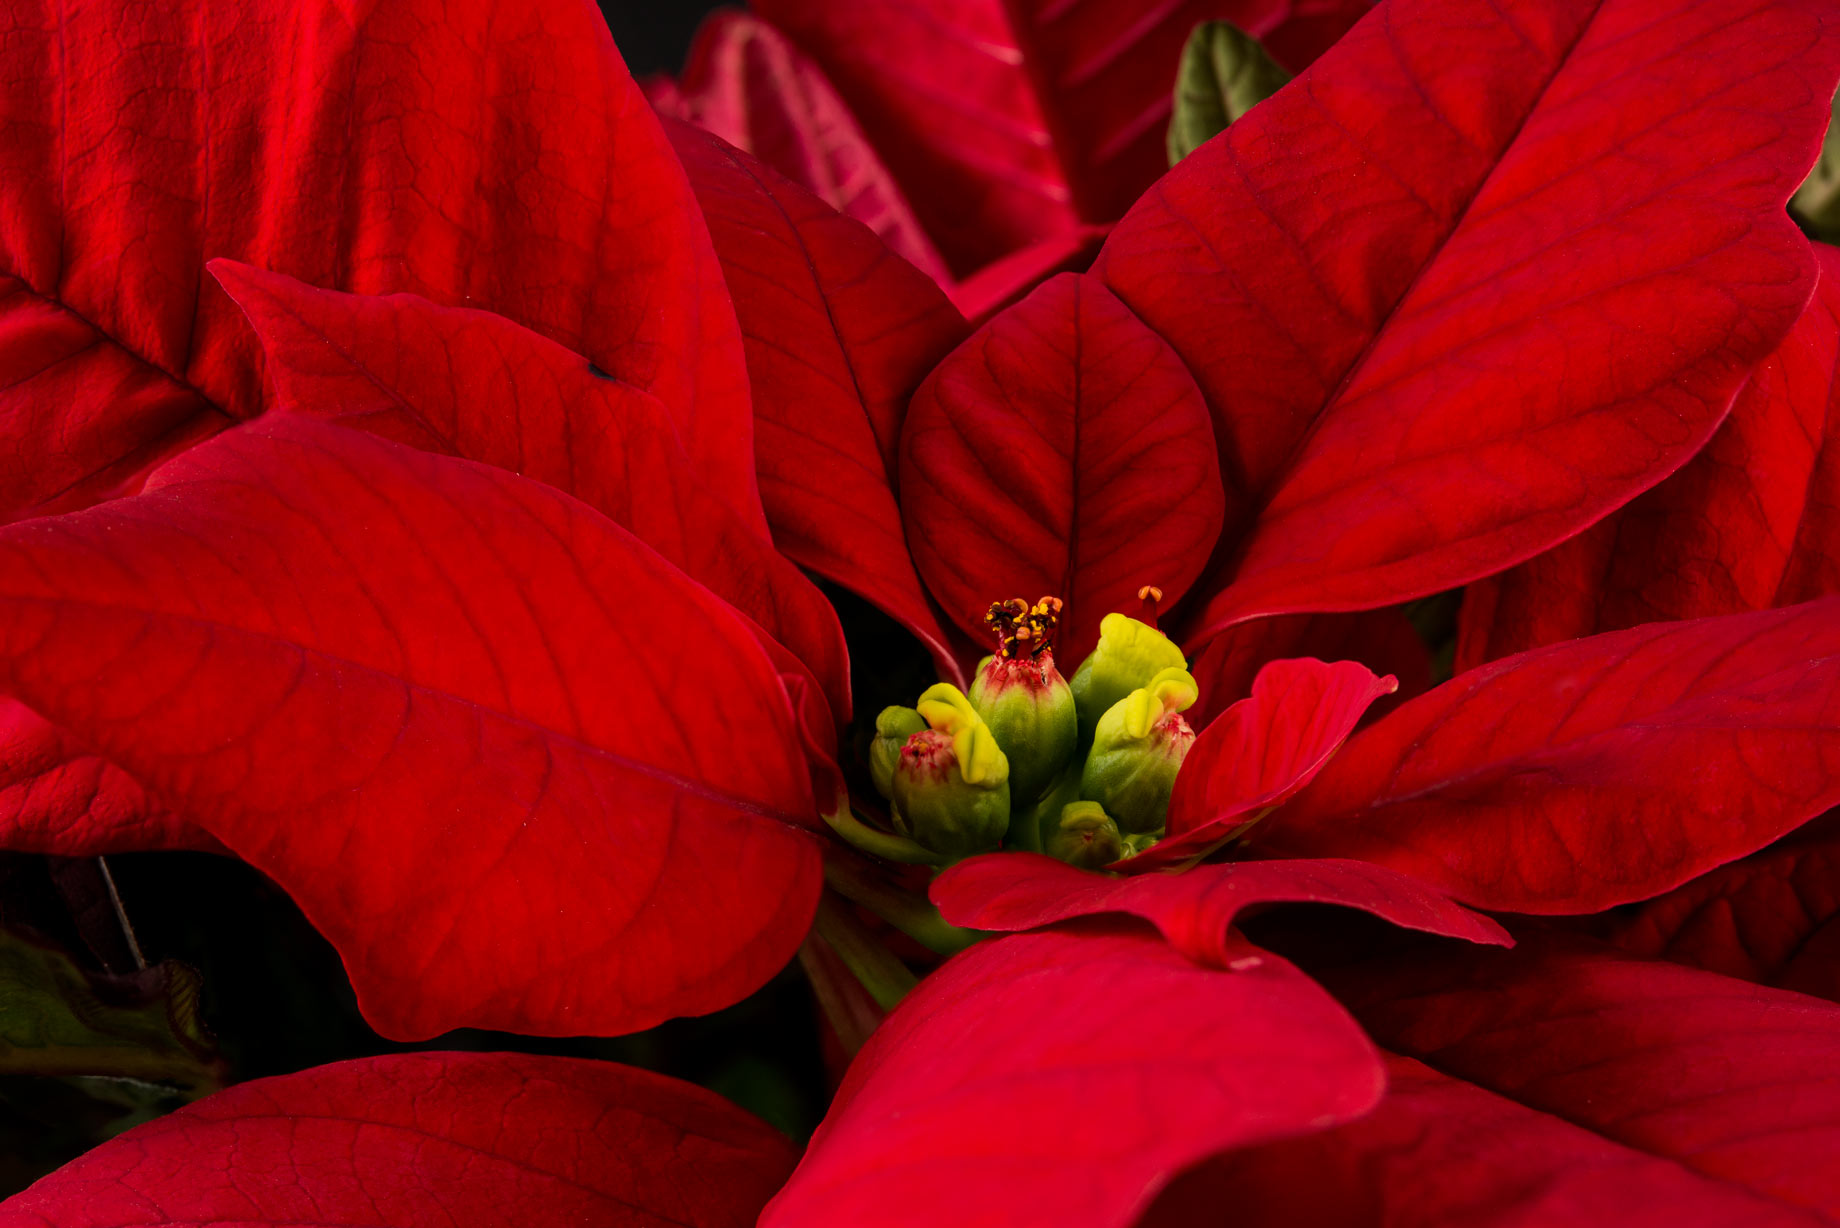 Xmas stacked with a poinsetta study